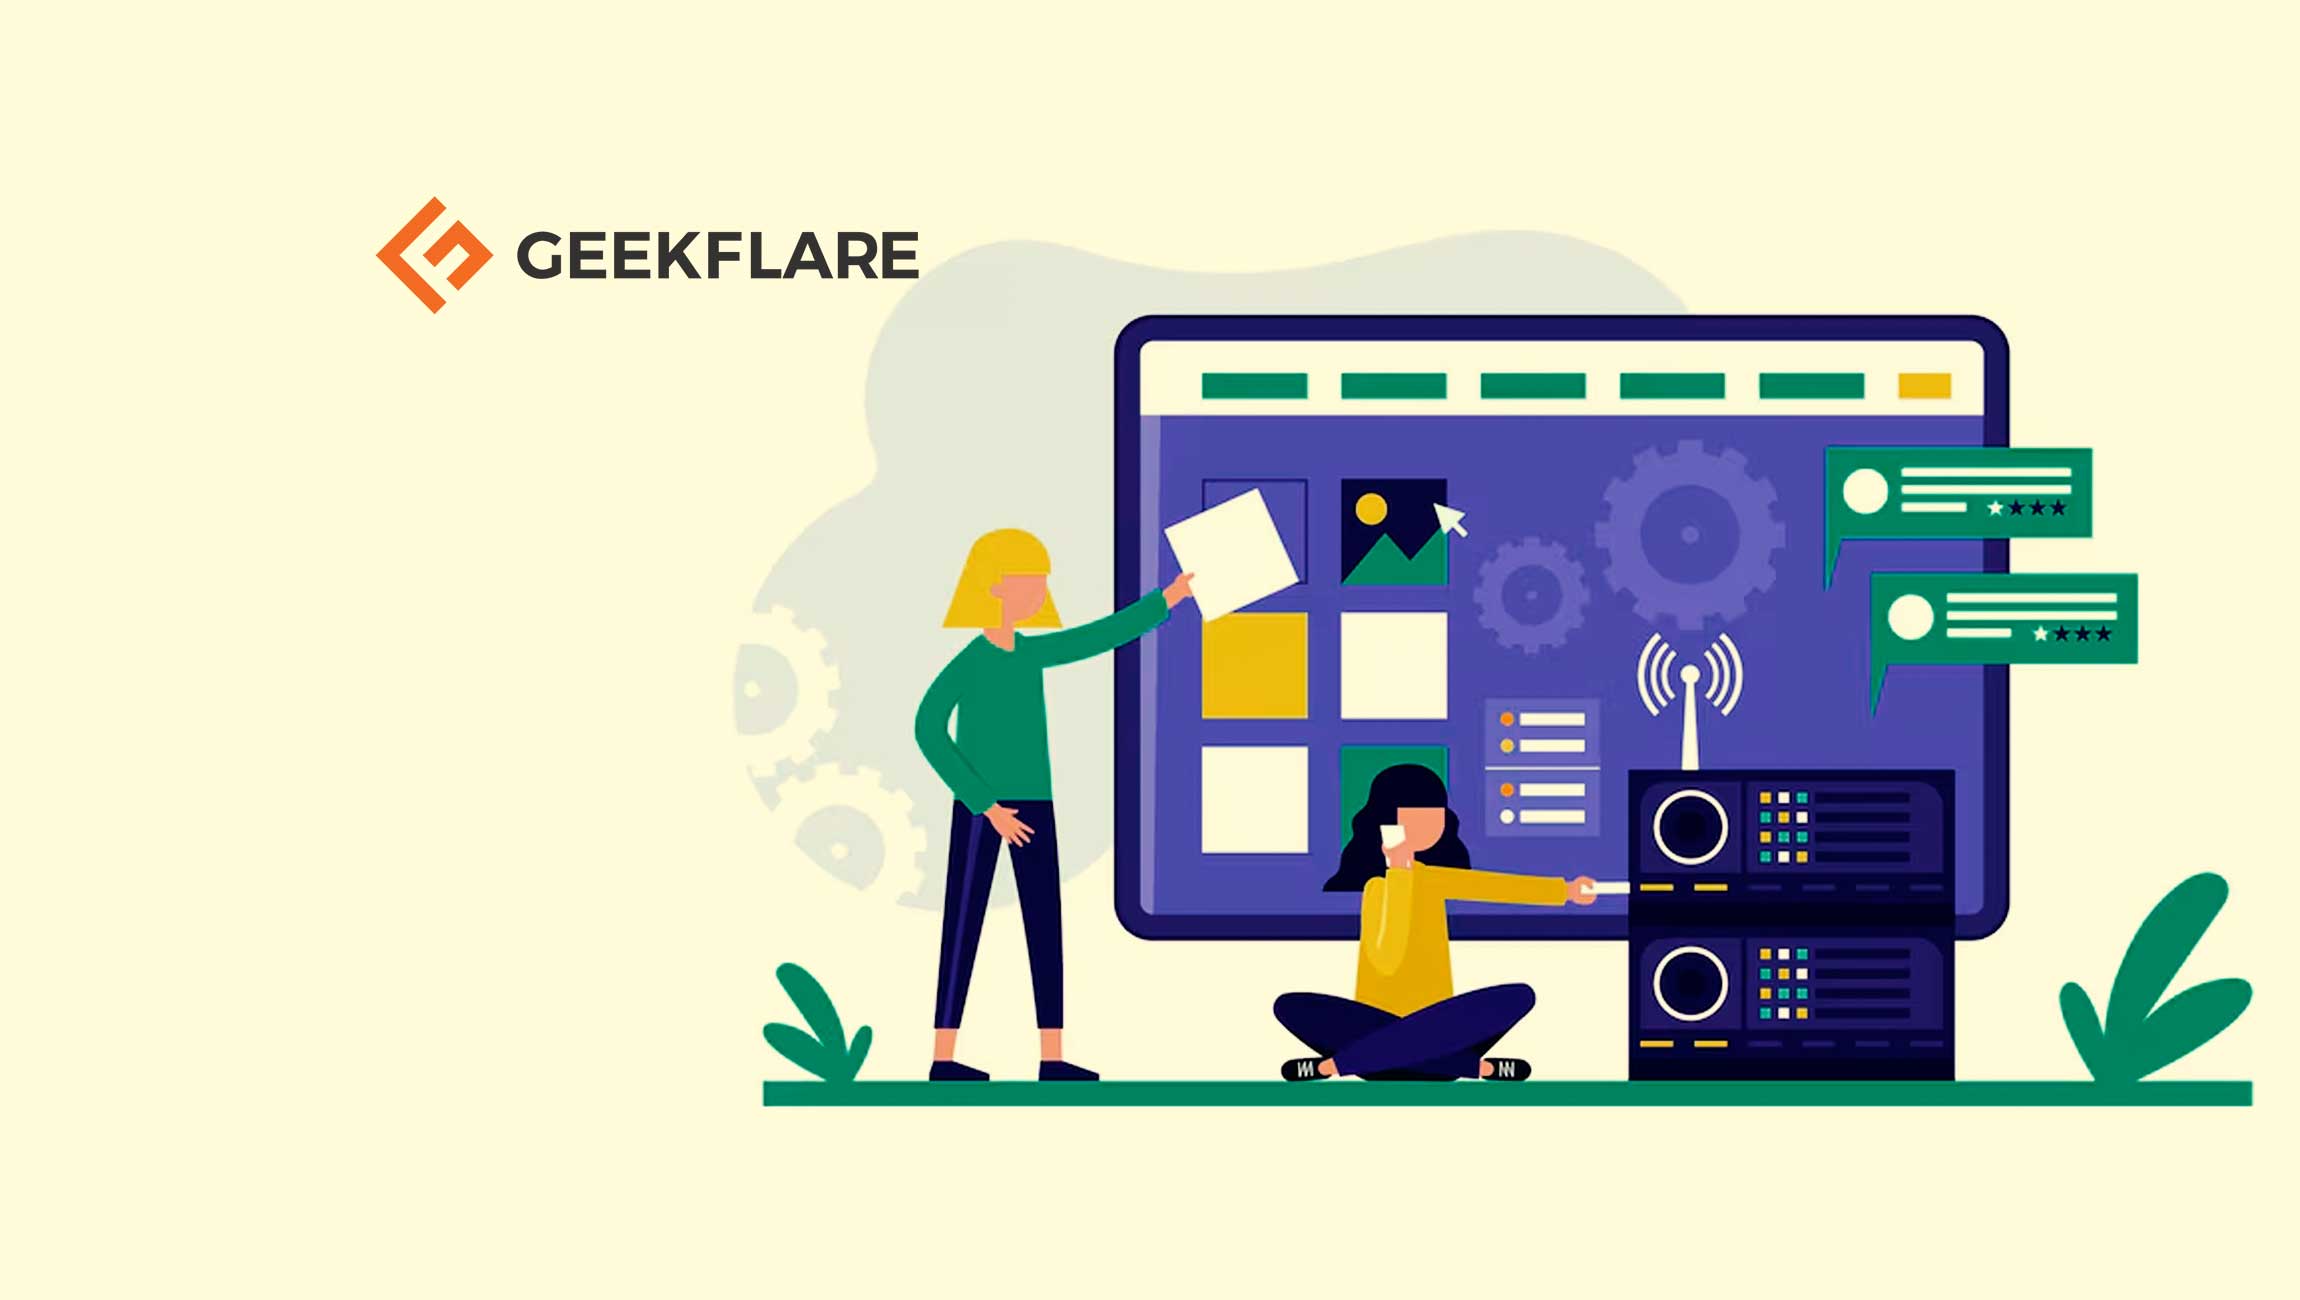 Geekflare Launches Geekflare 2.0 with Enhanced Features and Improved User Experience